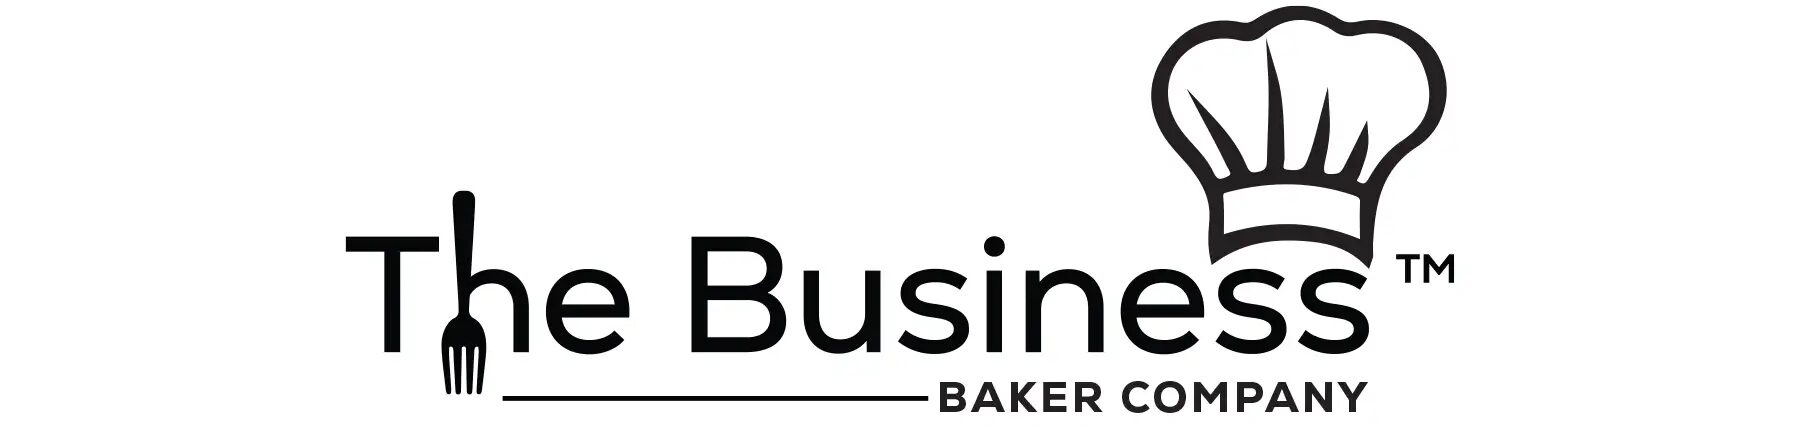 The Business Baker Company - Start Your Business